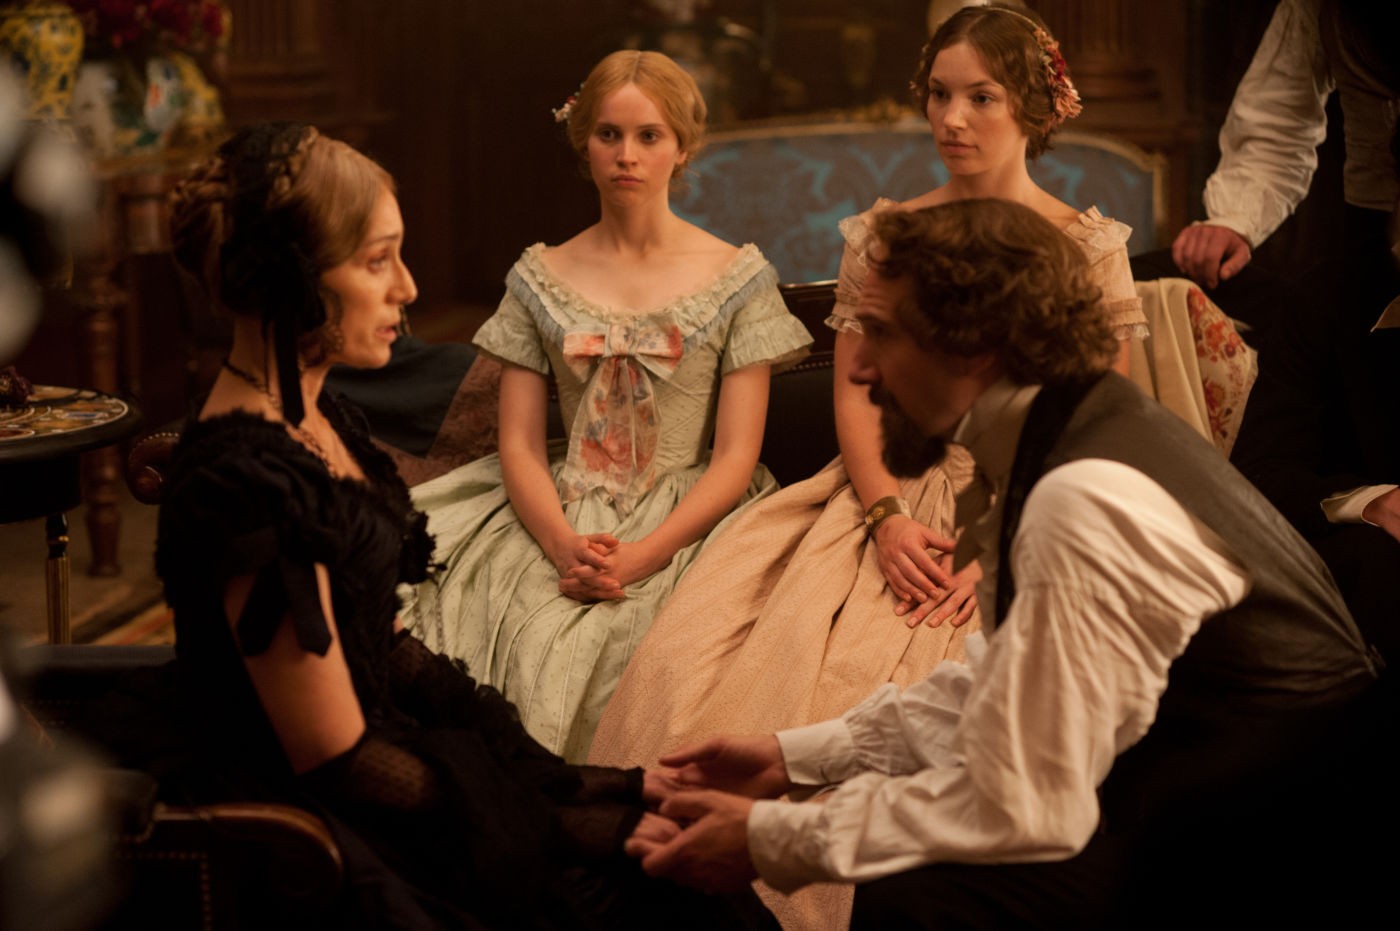 Kristin Scott Thomas, Felicity Jones, Perdita Weeks and Ralph Fiennes in Sony Pictures Classics' The Invisible Woman (2013). Photo credit by David Appleby.